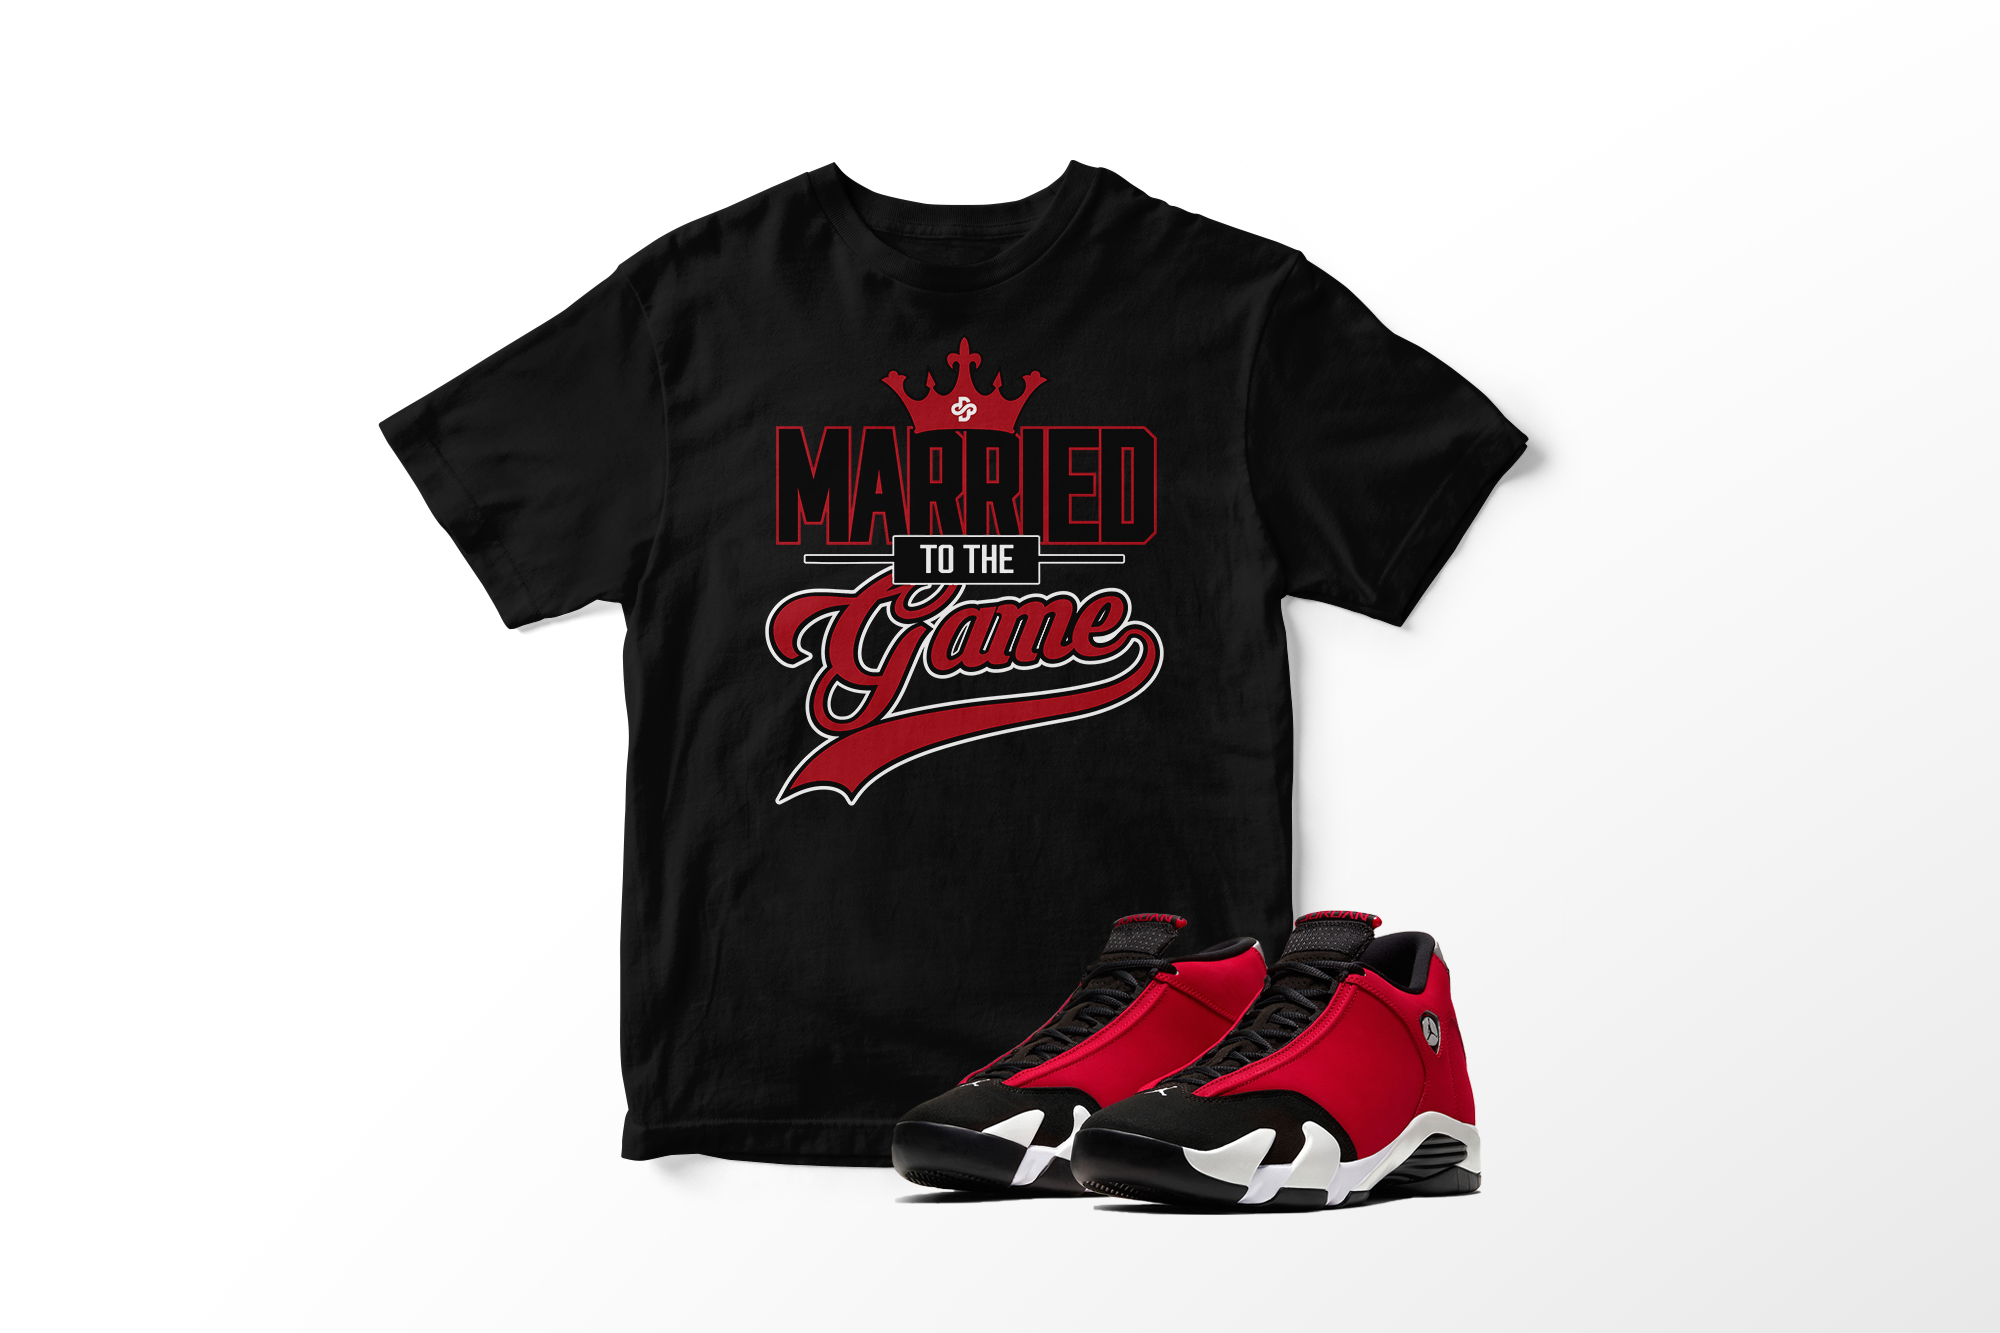 'Married To The Game' in Gym Red 14 CW Short Sleeve Tee